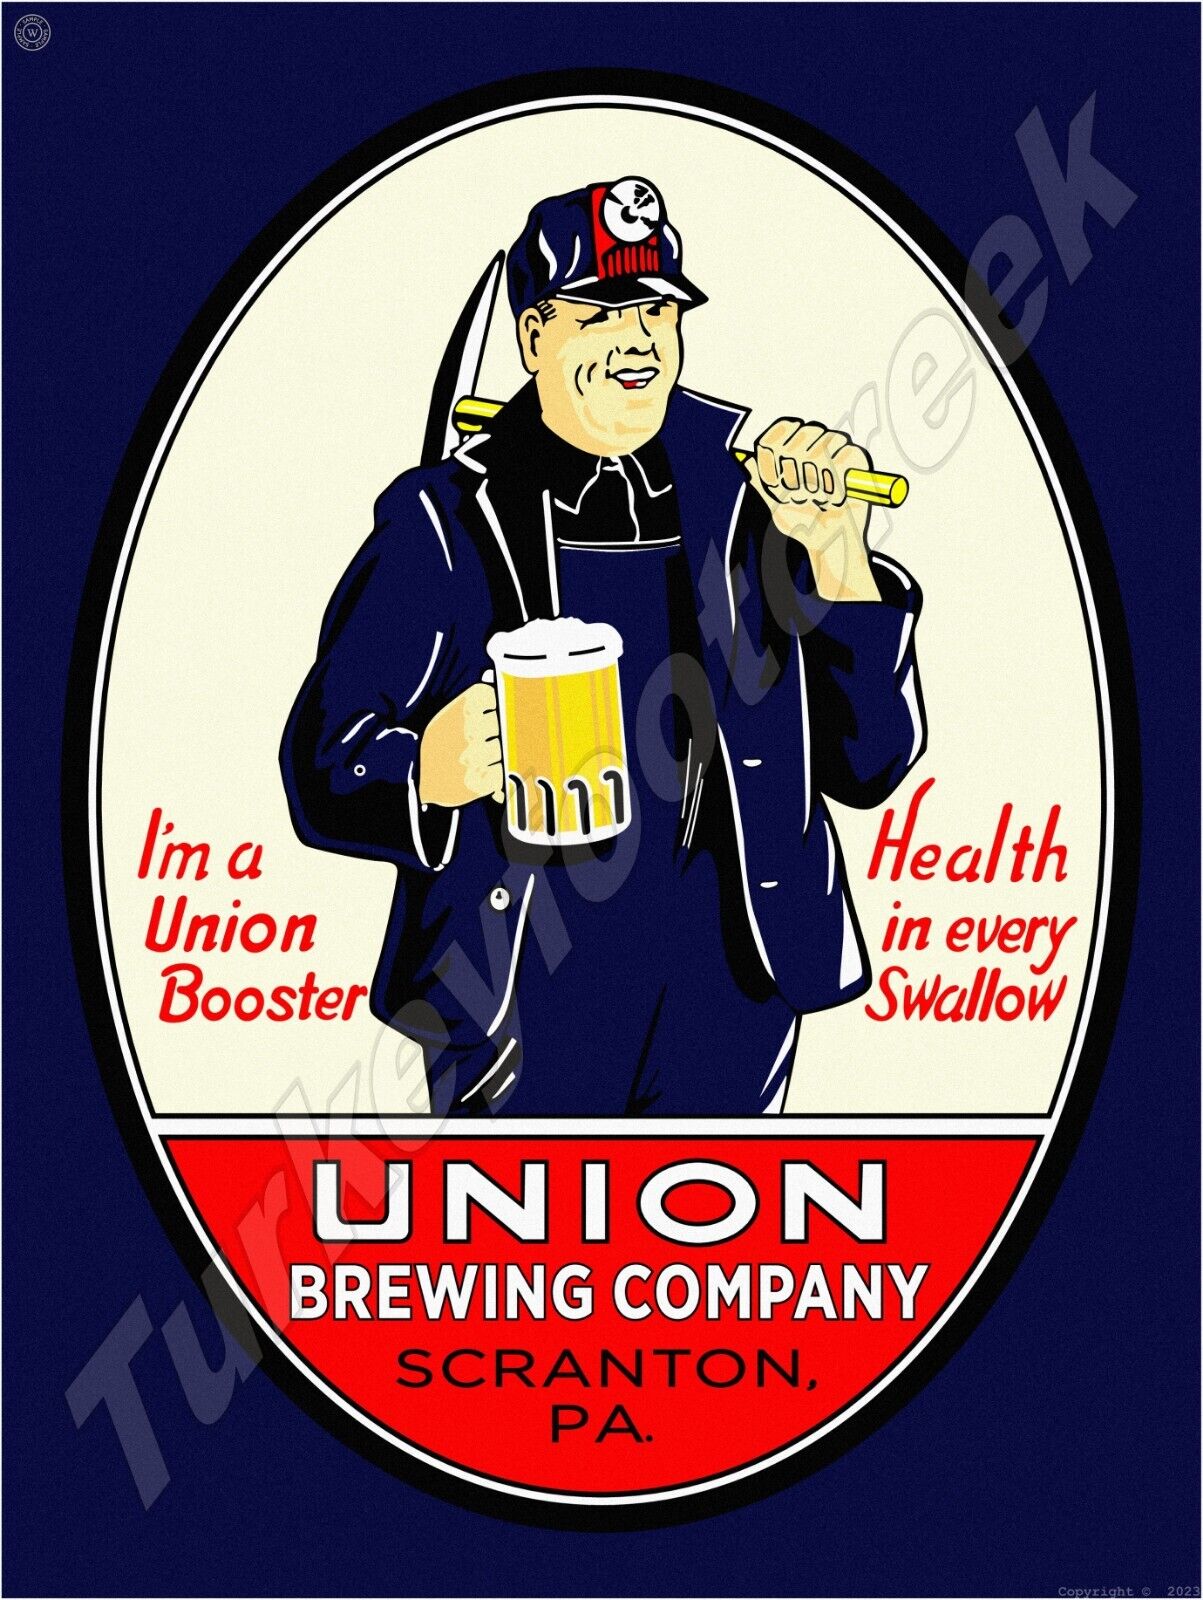 Union Brewing Company Scranton,pa Metal Sign 3 Sizes to Choose From